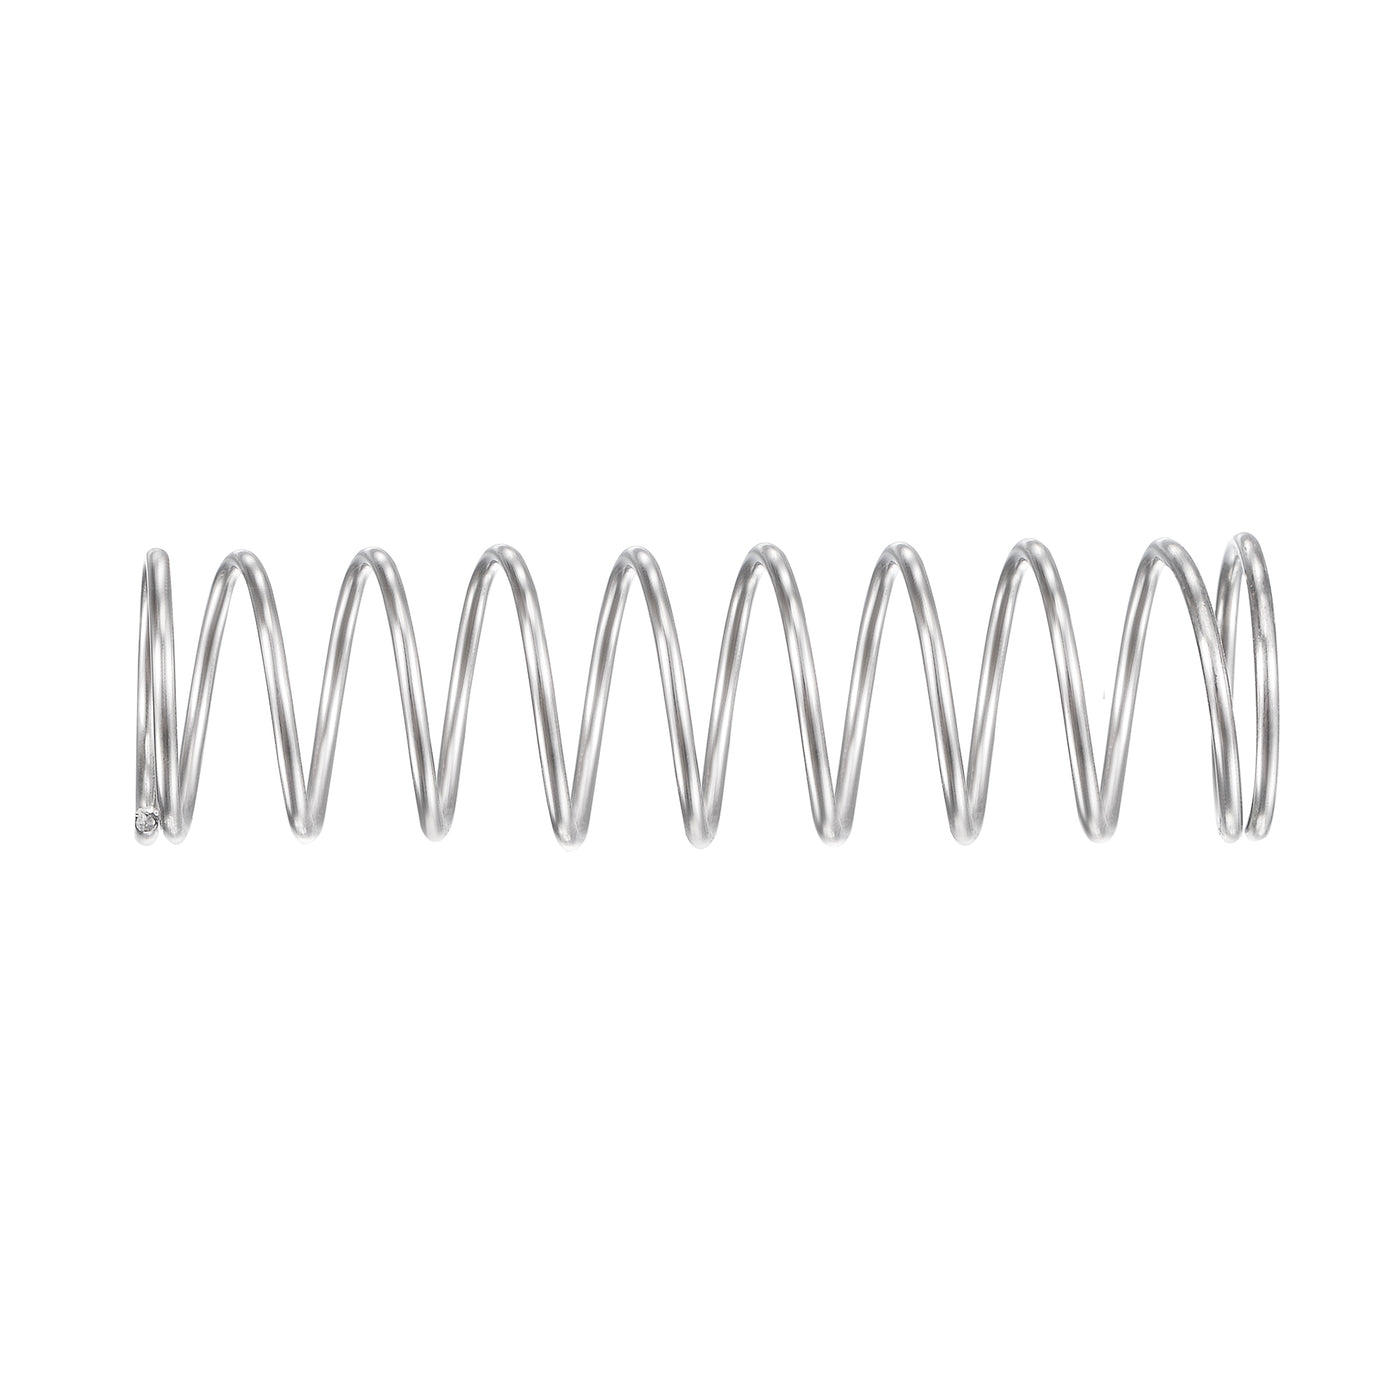 uxcell Uxcell 11mmx0.9mmx40mm 304 Stainless Steel Compression Spring 11N Load Capacity 20pcs